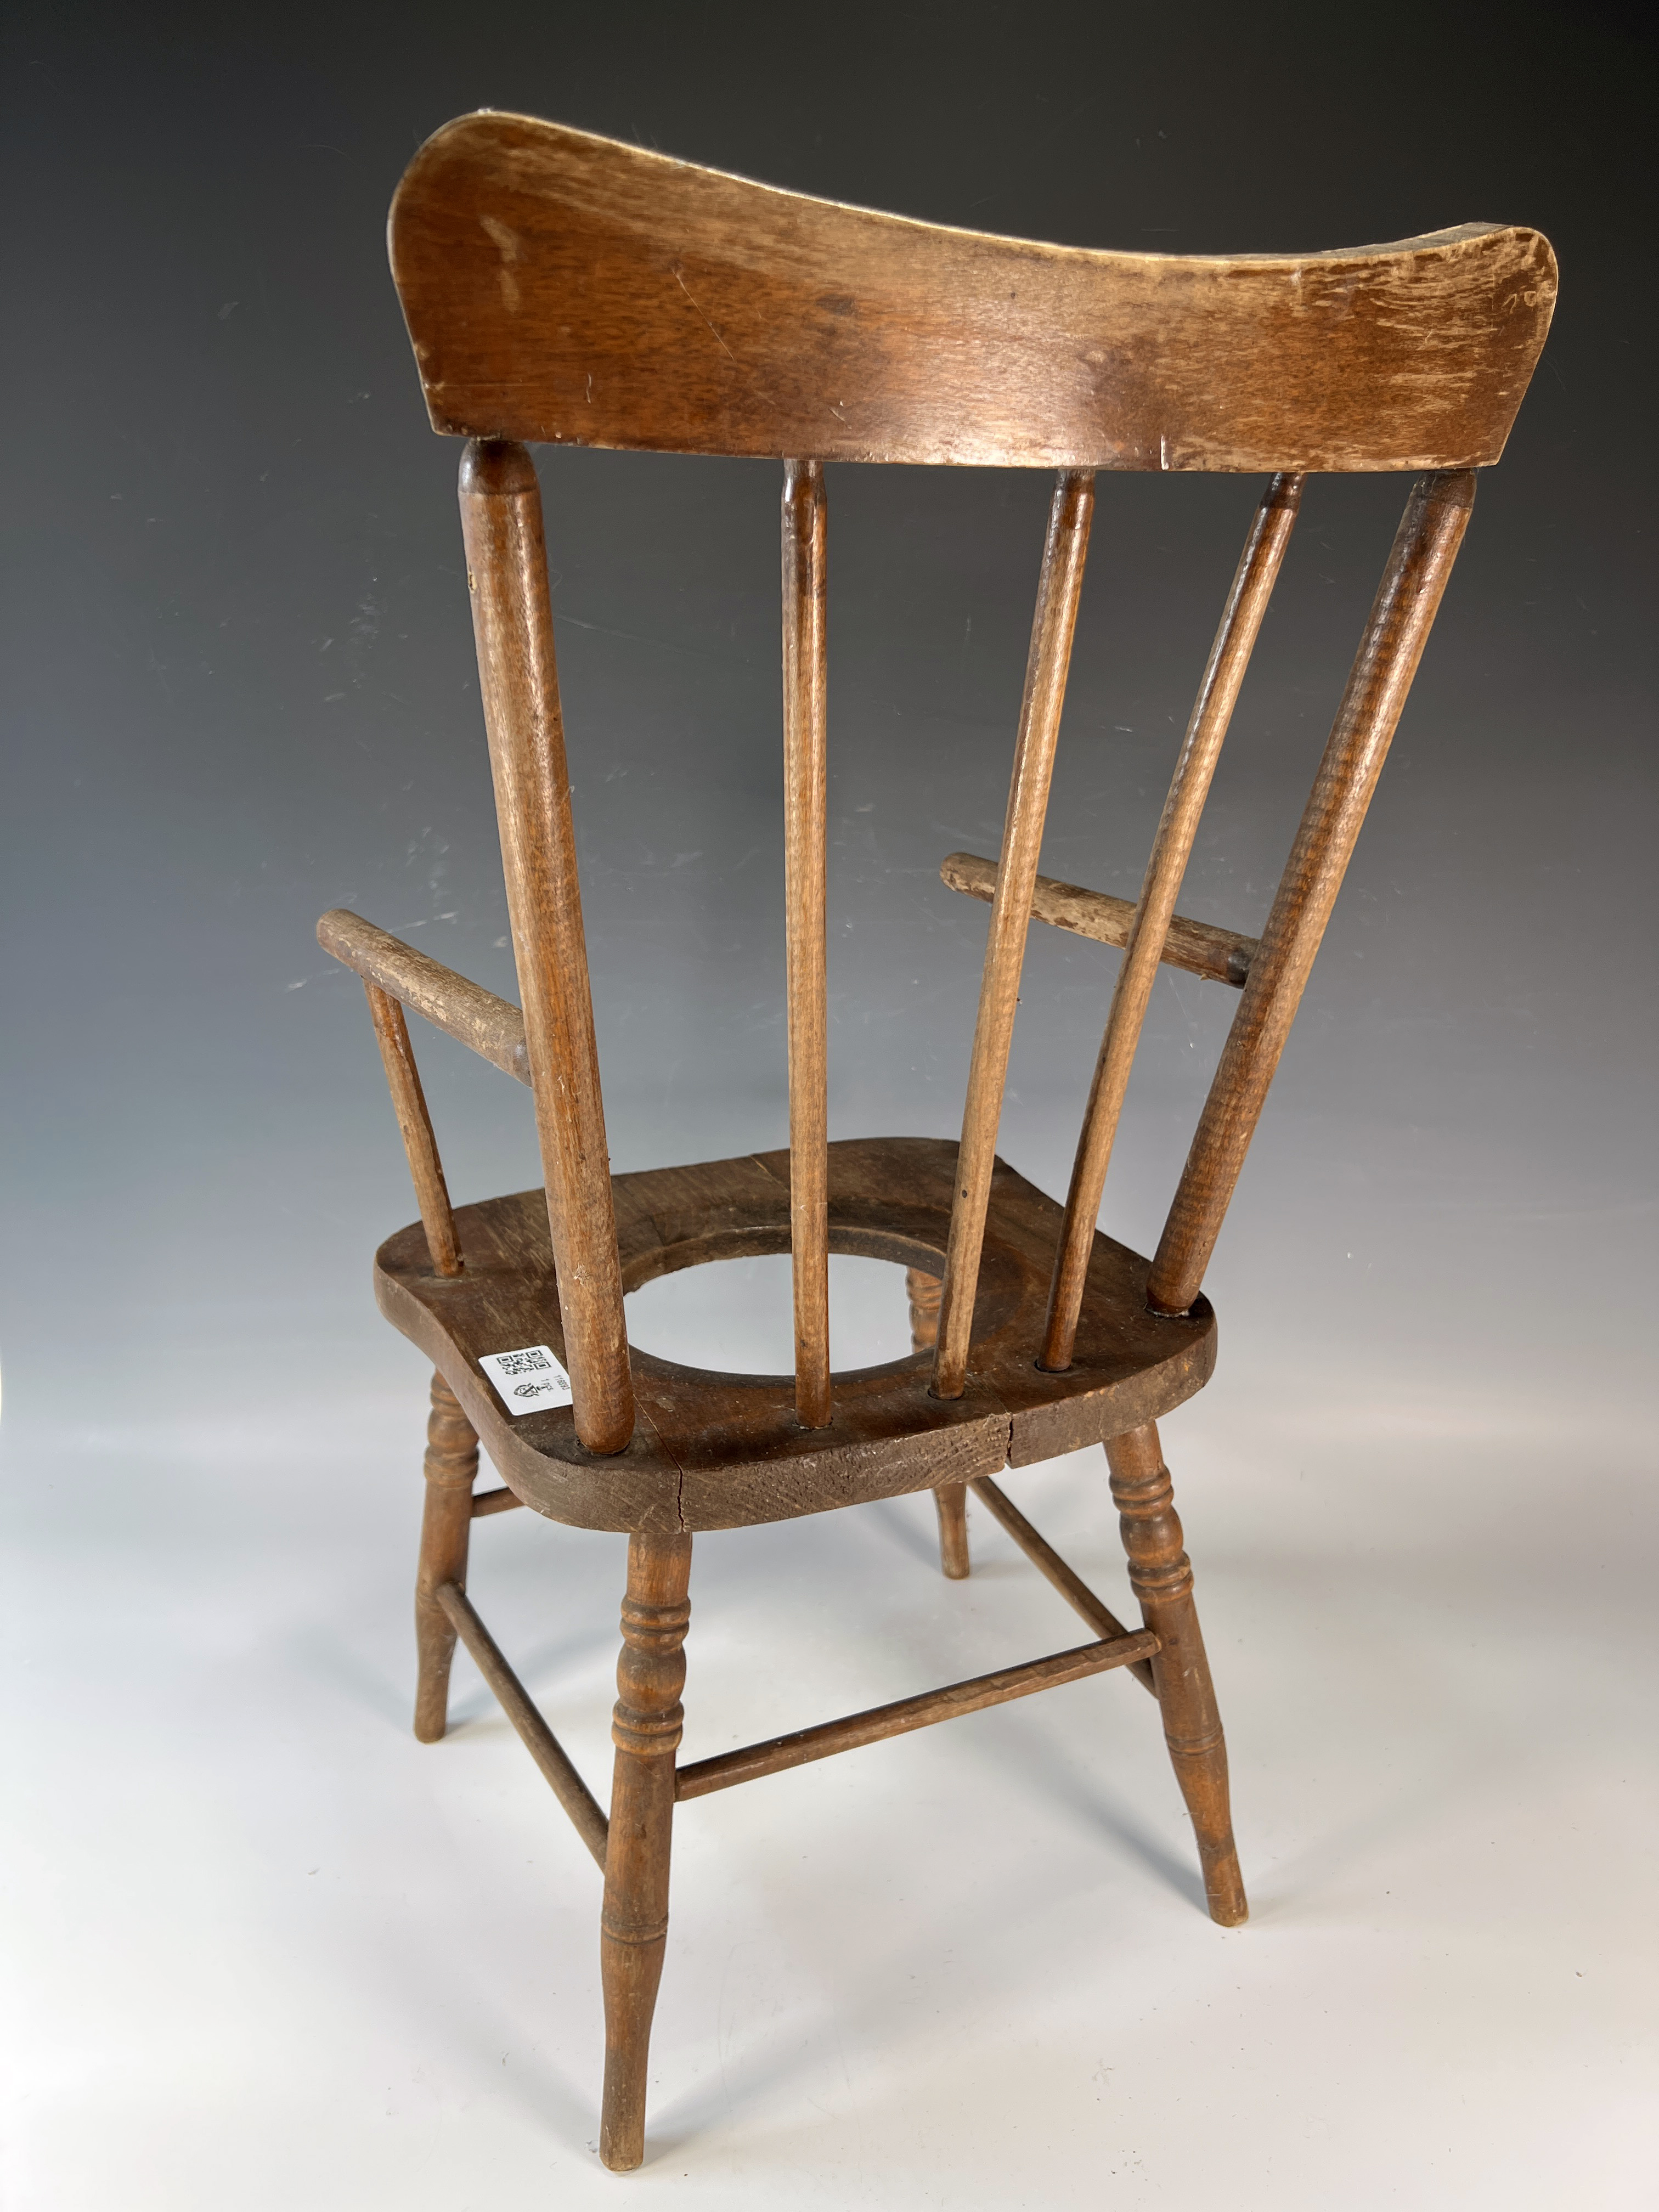 Vintage Wooden Potty Chair image 3